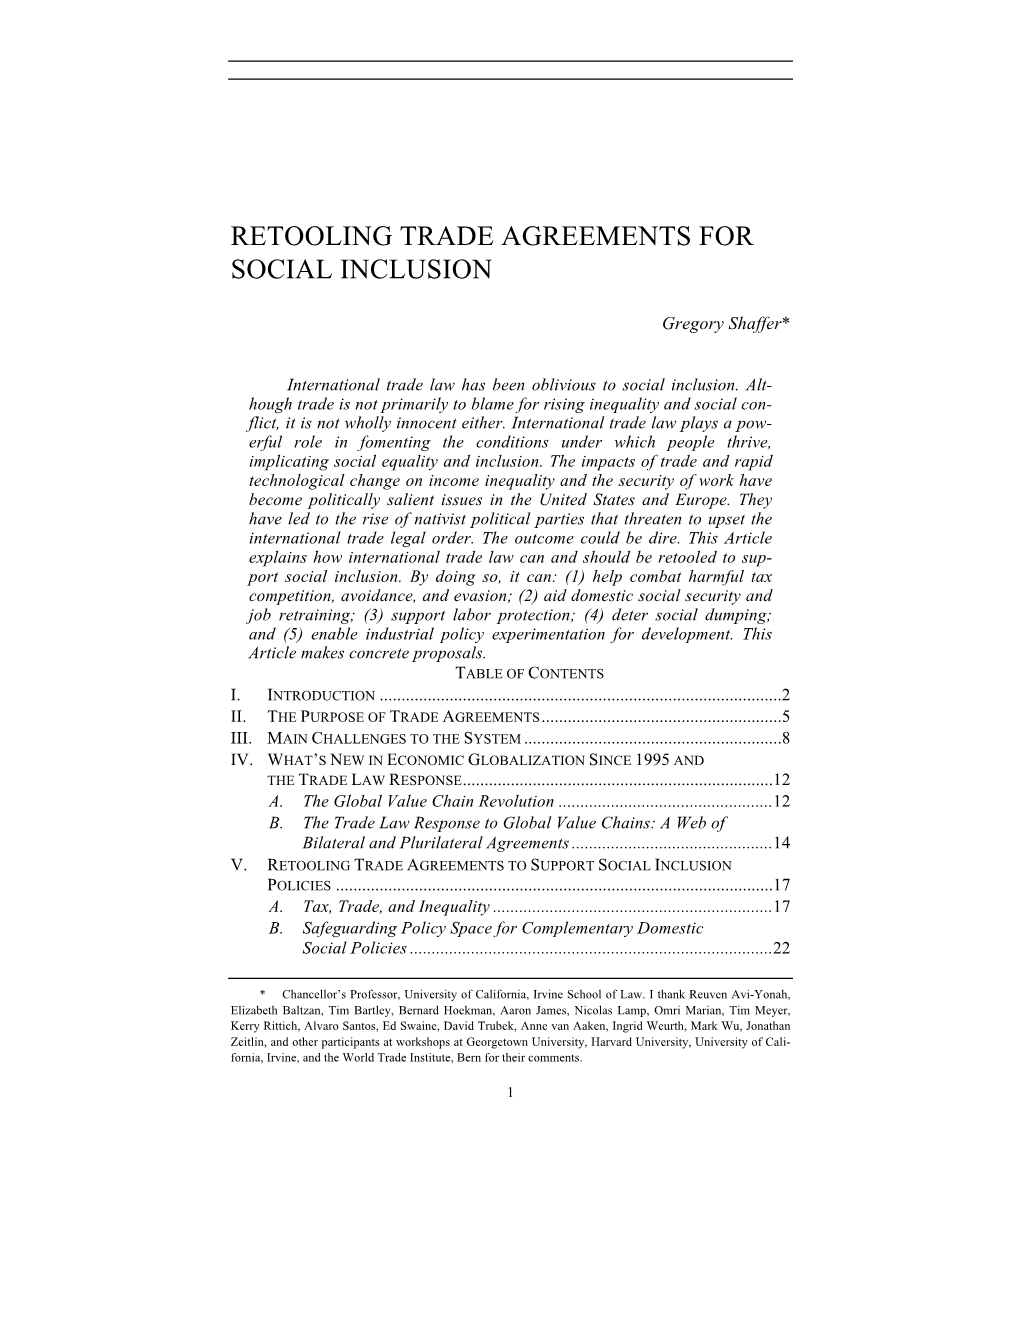 Retooling Trade Agreements for Social Inclusion